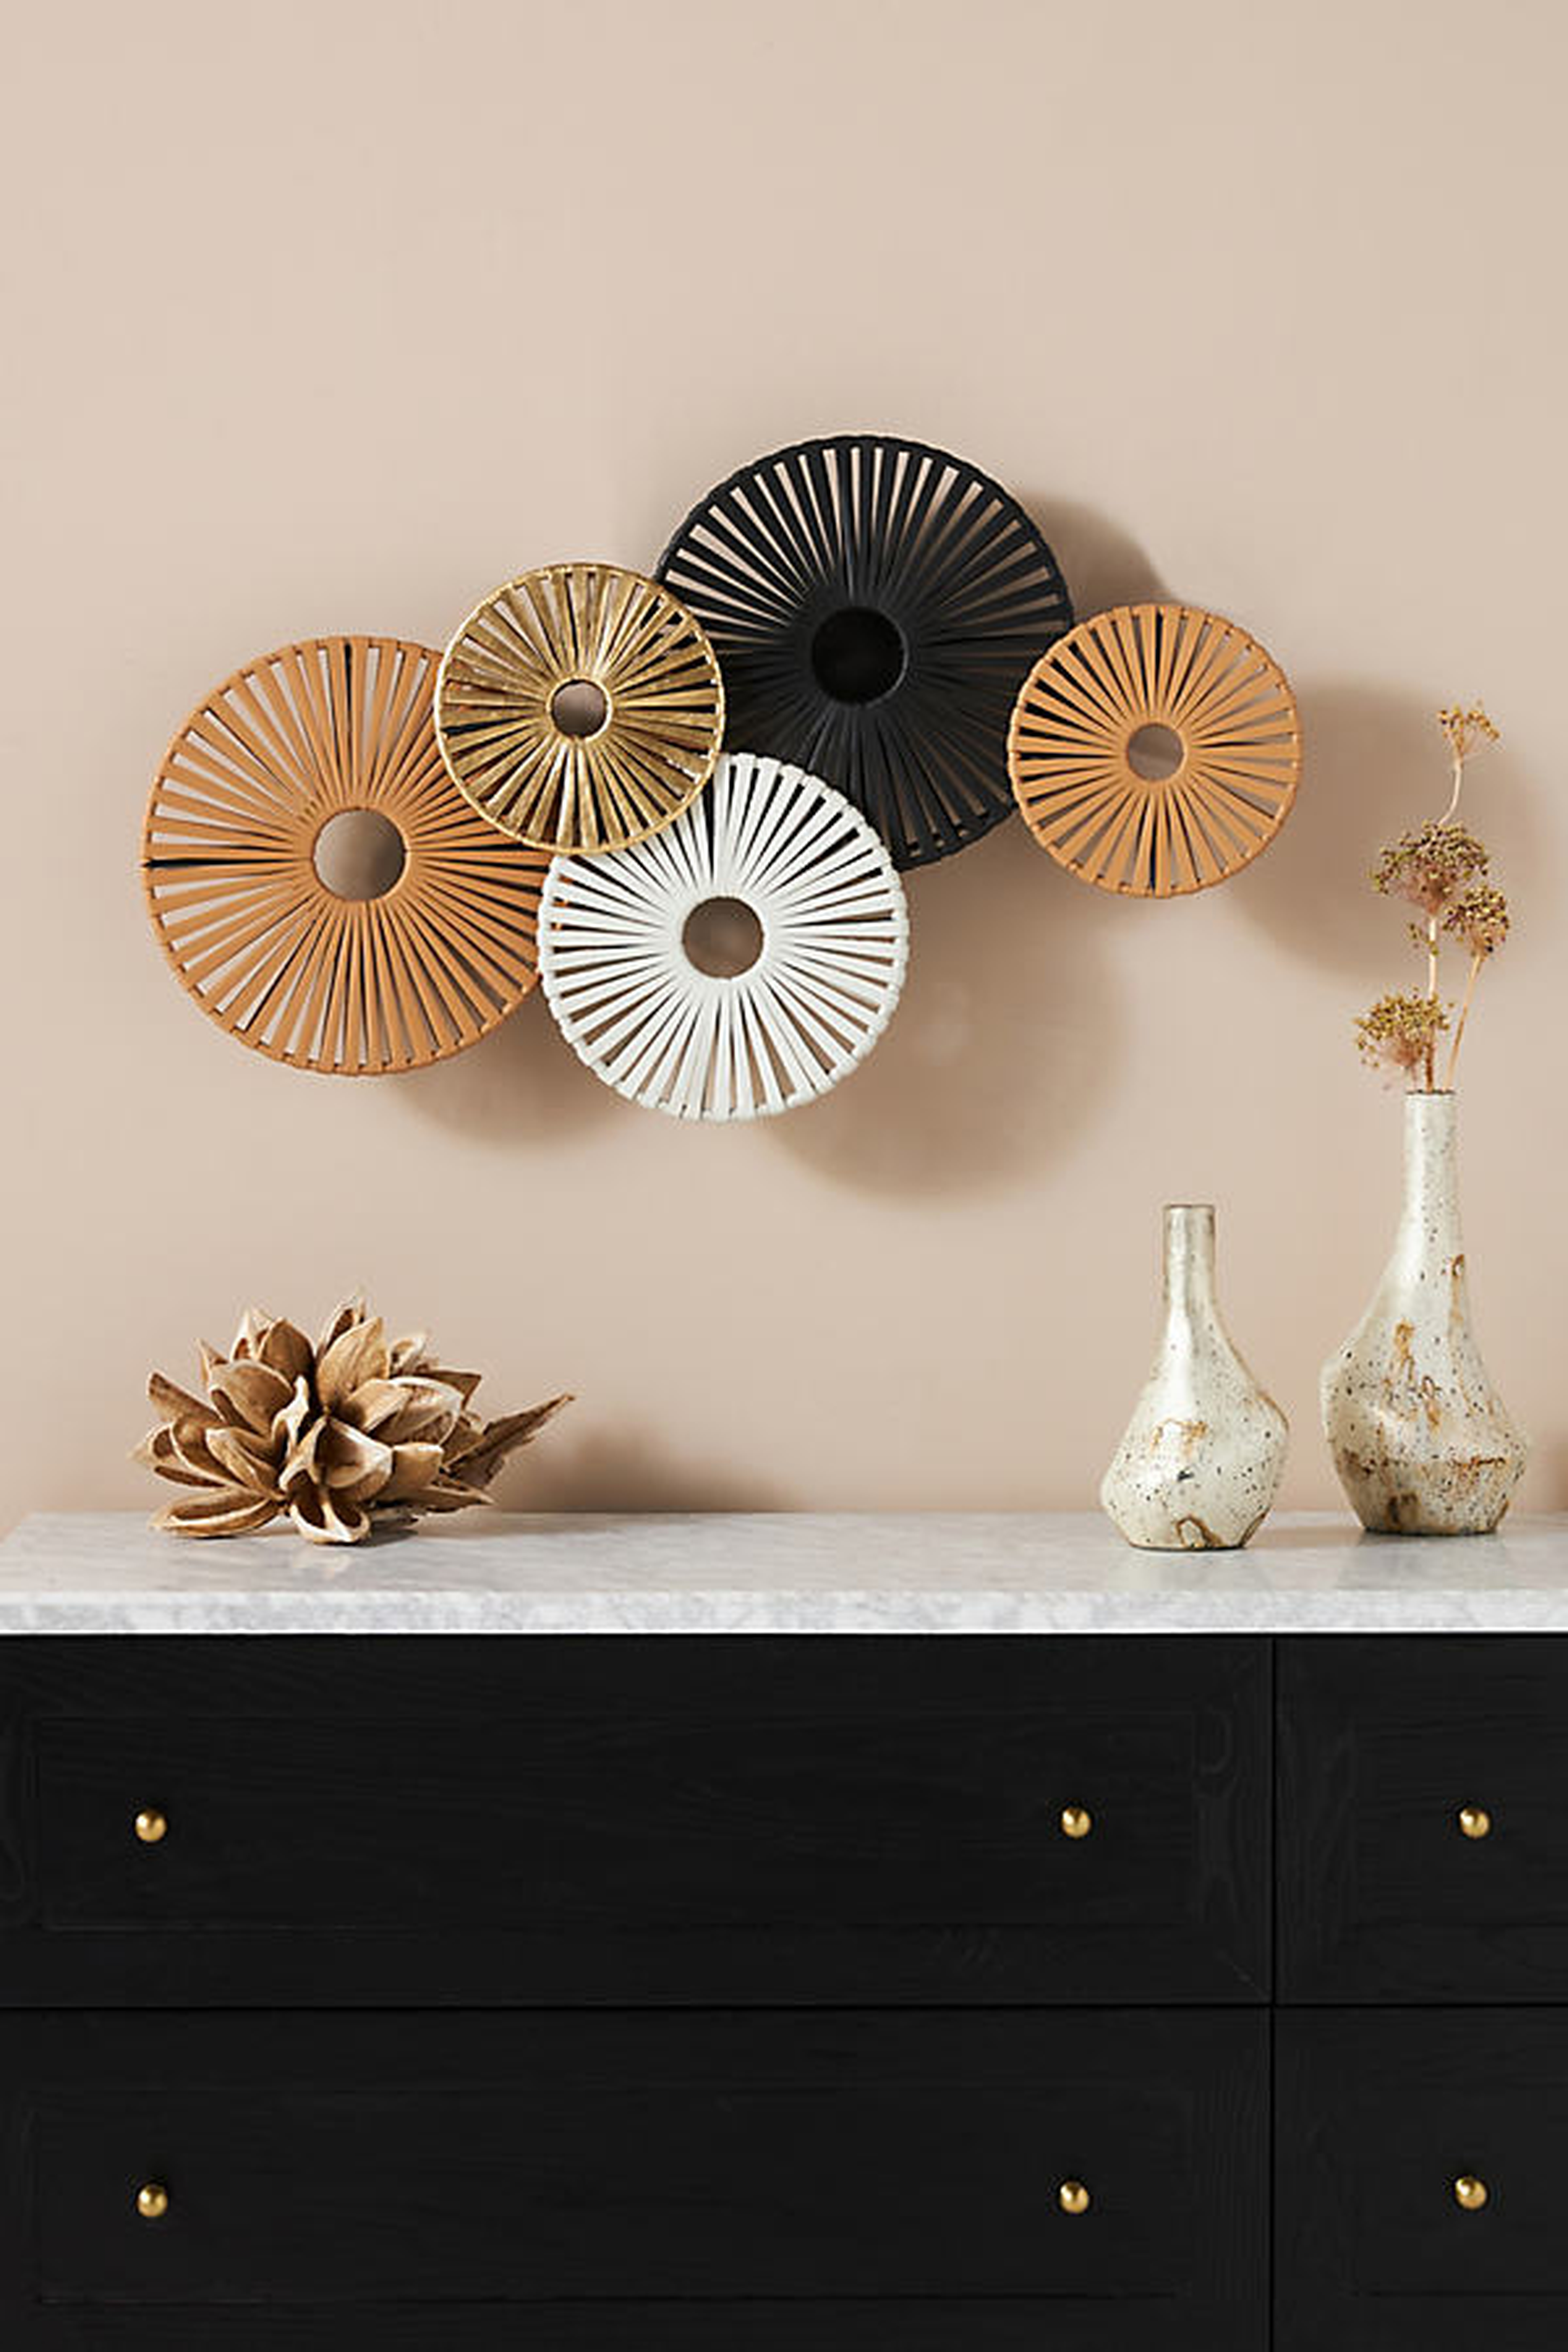 Elvira Leather Wall Art By Anthropologie in Assorted - Anthropologie